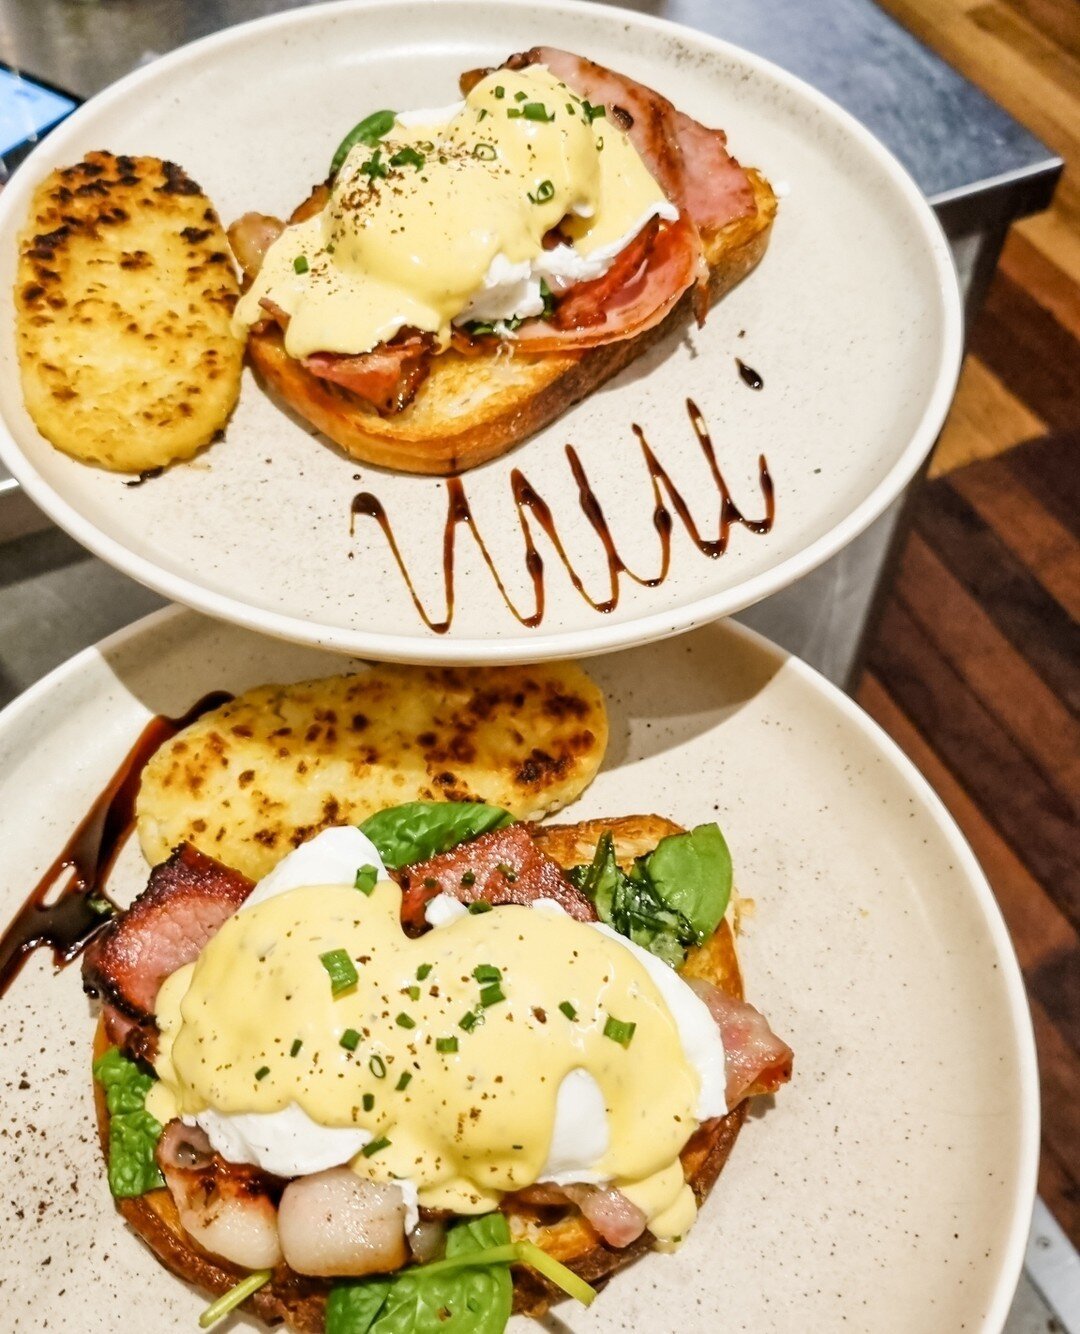 Start your day off right with a delicious breakfast or lunch from your favorite spot! Comment below with your go-to meal for the morning or afternoon! #breakfastorlunch #foodie #coffeeandfood⁠
⁠
#bnefoodie #breakfastinbrisbane #brisbanefood #bestcoff